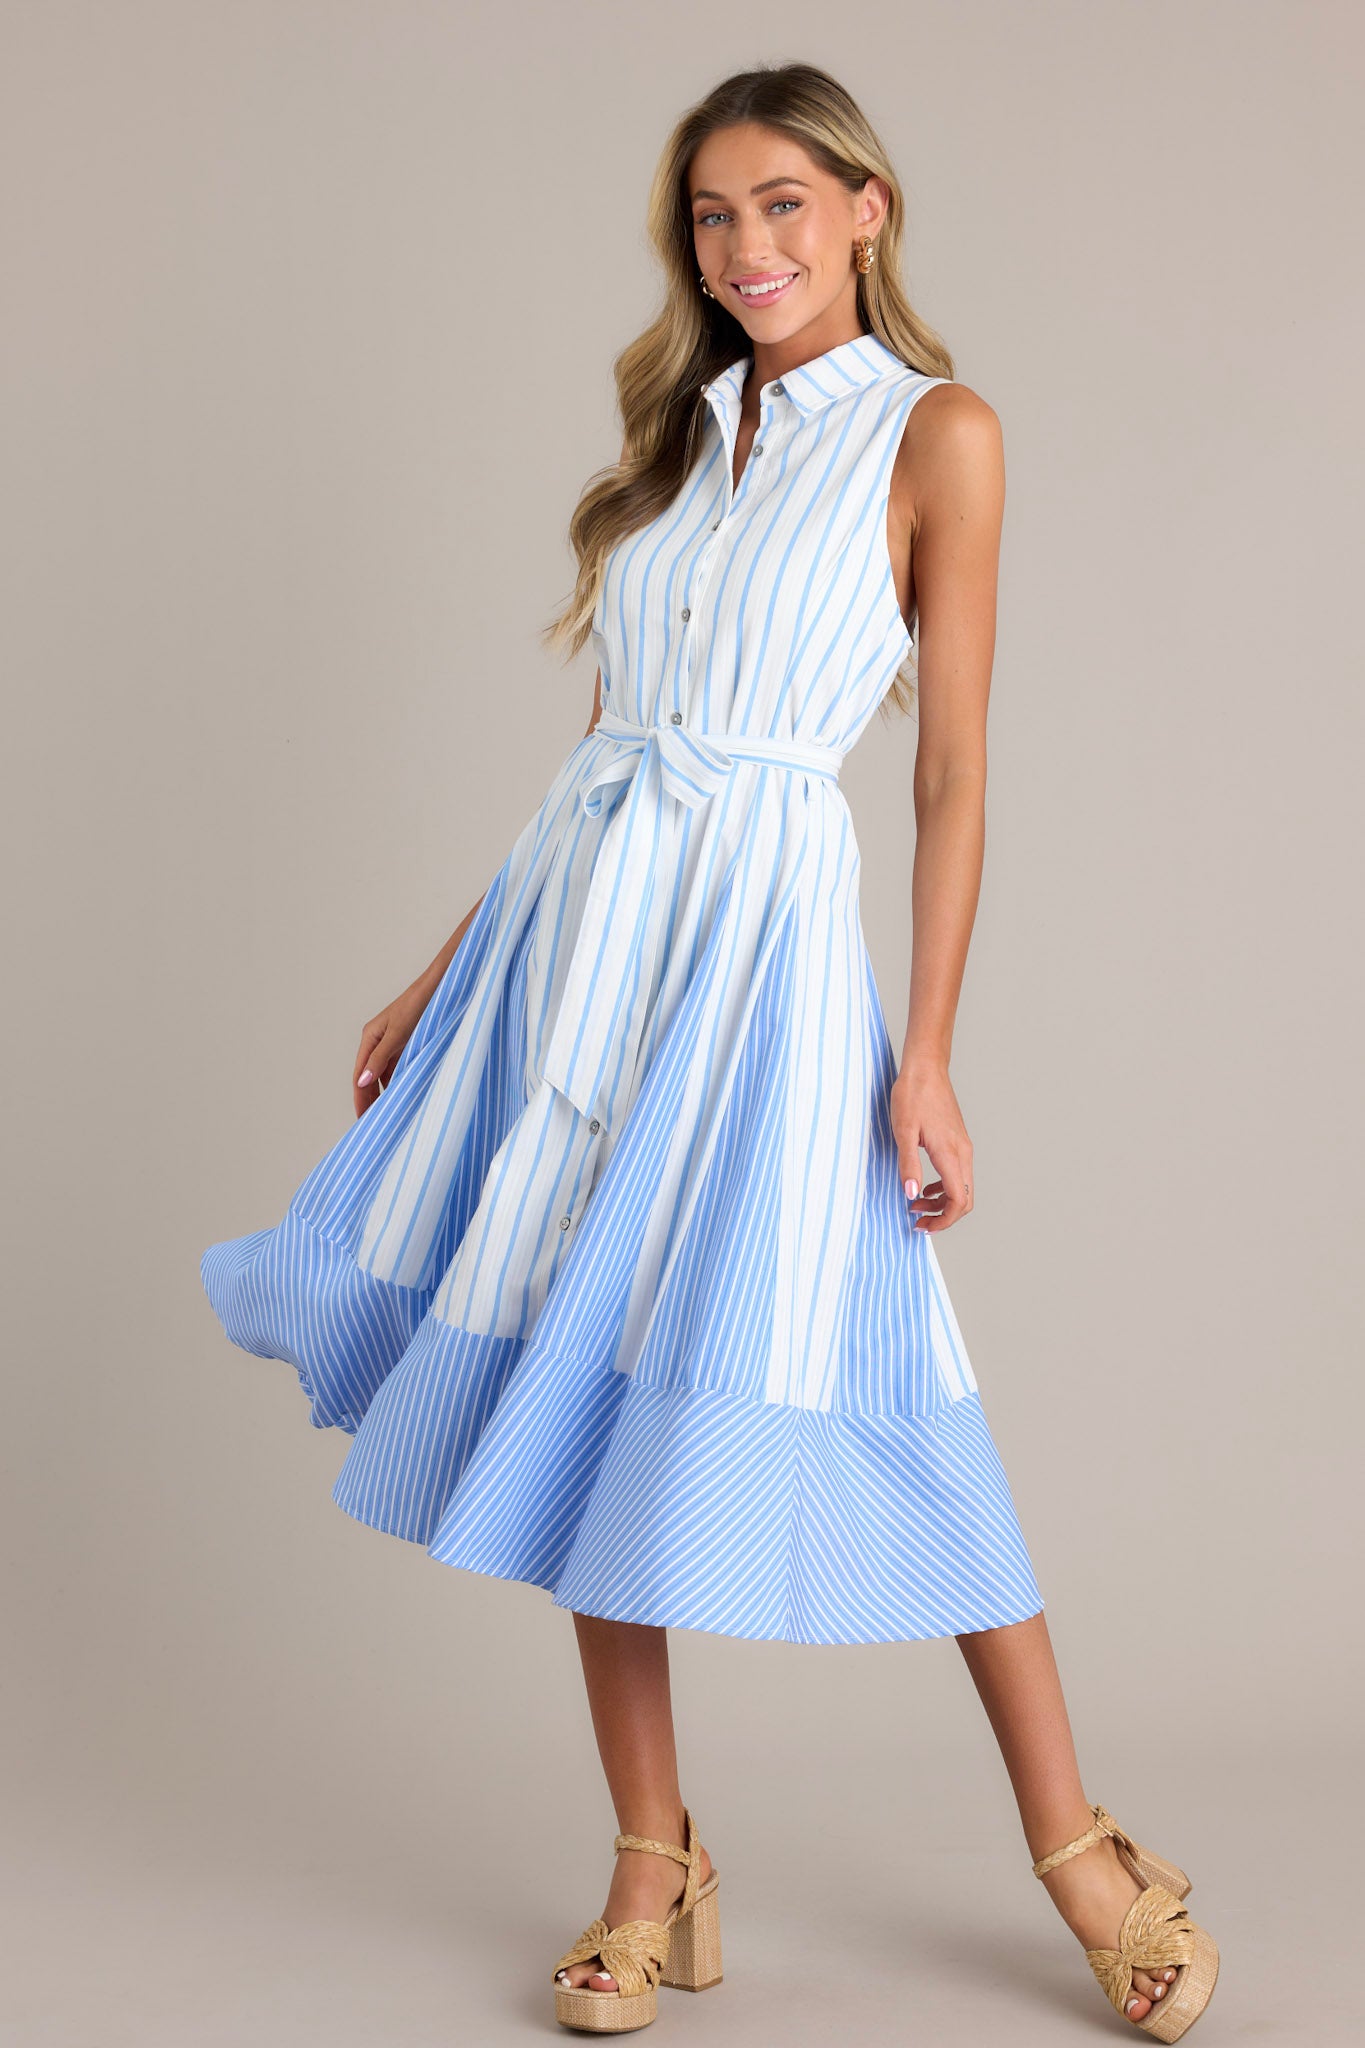 Action shot of a light blue midi dress with a collared neckline, a functional button front, a self-tie waist belt, a unique stripe pattern, and a flowing silhouette, highlighting the dress's flow and movement.